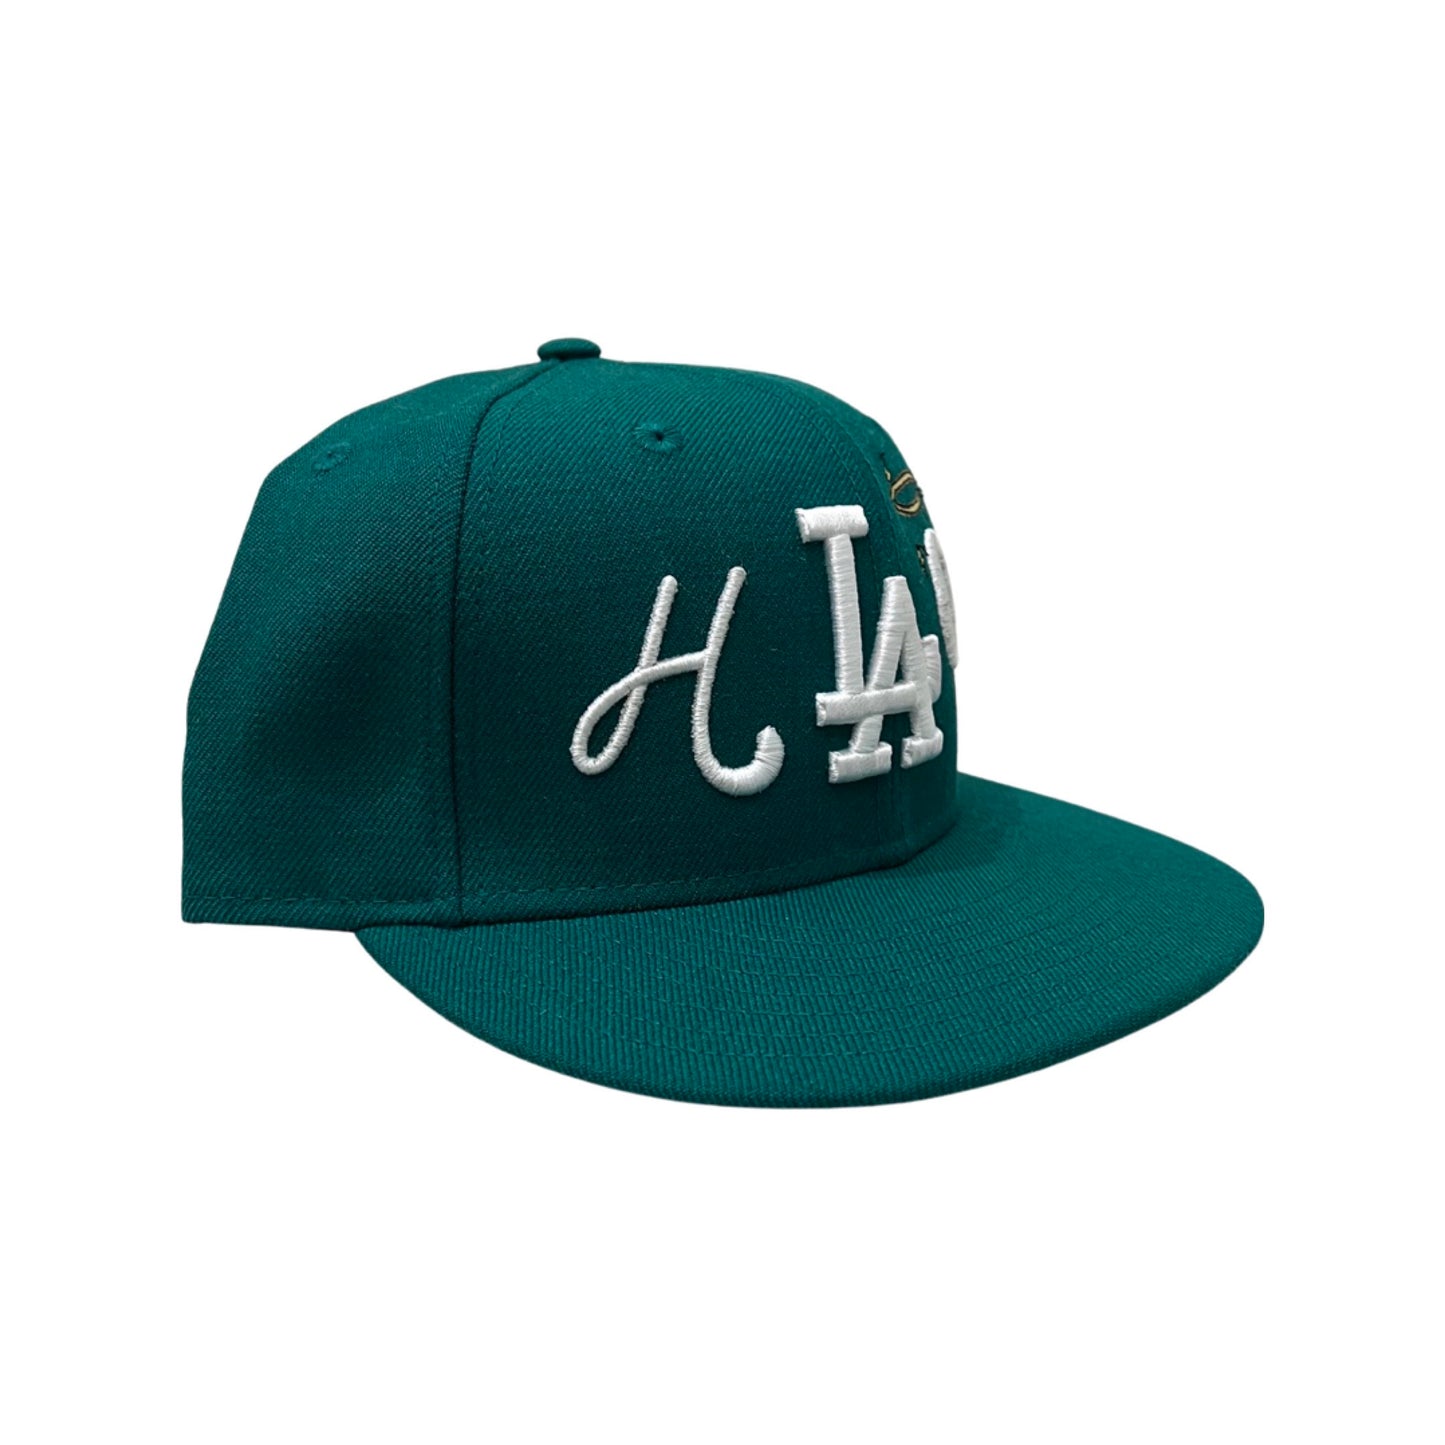 1/12 HALO FITTED HAT SIZE 7 1/8